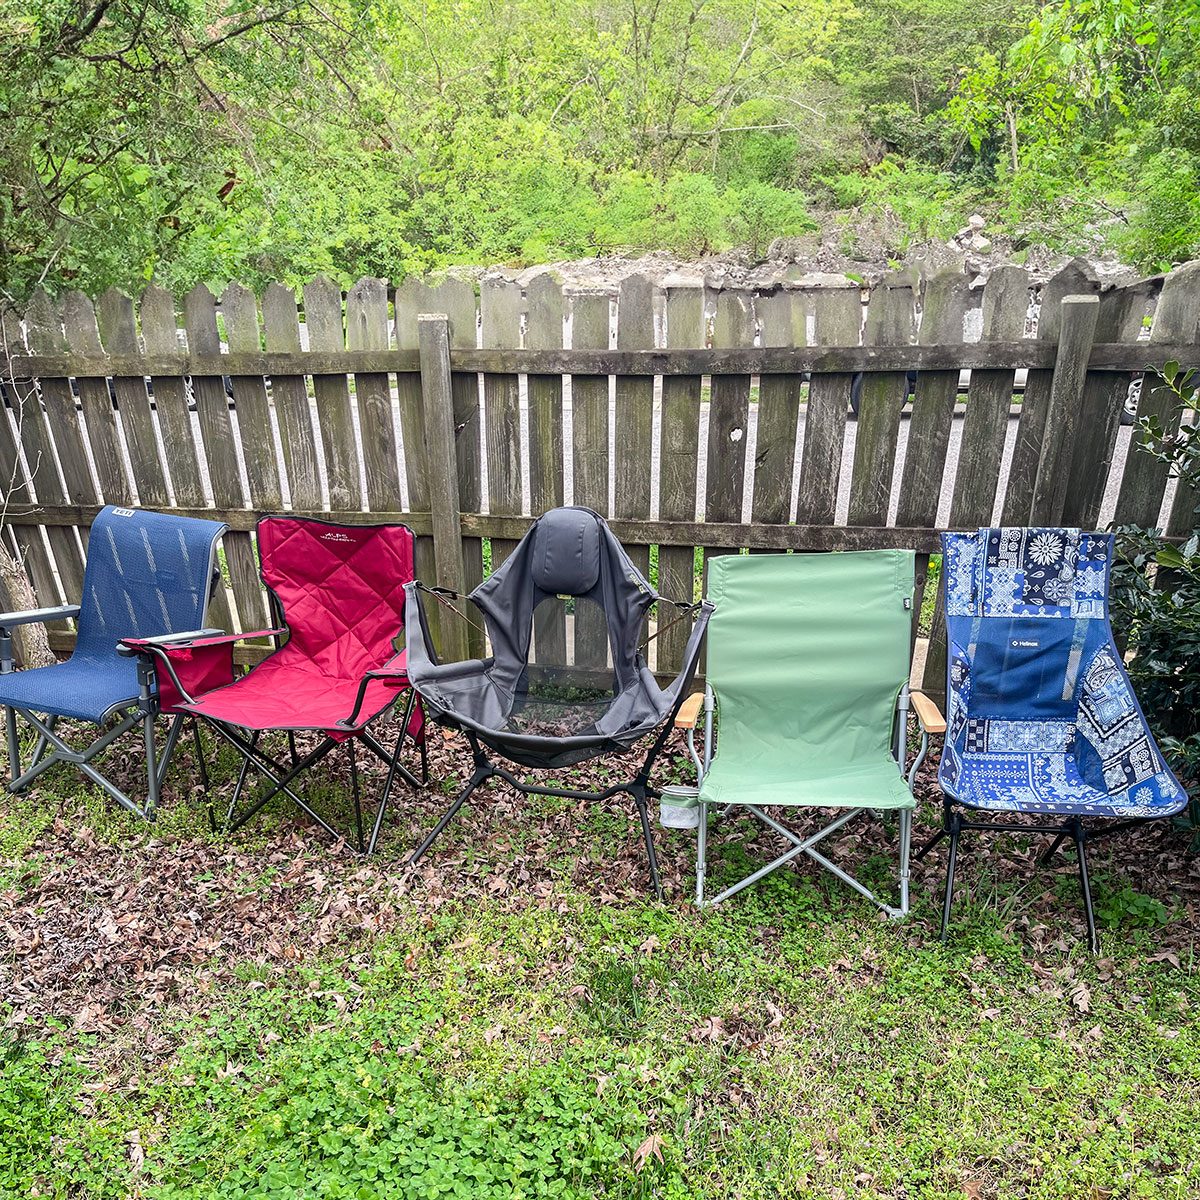 <p>Searching for a camping chair involves a lot more than finding a comfortable seat, though that's obviously one of the most important parts. John VanDerLaan, the founder of Deer Hunting Guide, says you also need to look at durability, simplicity in setup, portability and overall comfort.</p> <h3>Durability</h3> <p>A good camping chair will be comfortable for a few uses, while a great camping chair will feel as good on your 1,000th camping trip as it did on your first. Ripstop polyester and ripstop nylon are two of the most durable fabrics. Look for features such as water and UV protection to increase the chair's durability.</p> <h3>Simplicity in Setup</h3> <p>This means that the camping chair should be easy to fold and unfold. Look for ones that involve minimal steps and have little to no assembly.</p> <h3>Portability</h3> <p>When looking at a camping chair's portability, it's important to look at two factors: its packed dimensions and unfolded dimensions. Packed dimensions refer to how big/heavy it is when folded or packed in a carrying case (if it comes with one). Backpackers and hikers should look for lighter chairs that won't take up much space in their camping bags, whereas car campers can go for something a little larger.</p> <h3>Overall Comfort</h3> <p>Besides the seat, check to see that the camping chair has a comfortable backrest (if you're tall, look for one with a higher backrest) and armrest.</p> <h3>Special Features</h3> <p>Although not a necessity, we tend to prefer camping chairs that come with special features such as cup holders, headrests and storage pockets for things like books and snacks.</p> <h2>Why You Should Trust Us</h2> <p>The <em>Family Handyman</em> team is composed of writers and editors who have spent countless times exploring Mother Nature, so we know a thing or two about camping chairs. This writer has explored Appalachia and Shenandoah, and other writers who contributed to this piece have been camping since they were toddlers.</p> <p>Additionally, we enlisted the help of several camping experts and full-time travelers, including John VanDerLaan, the founder of <a href="https://www.deerhuntingguide.net/" rel="noopener">Deer Hunting Guide</a>; travel expert Charlie Neville of <a href="https://jaywaytravel.com/" rel="noopener">JayWay Travel</a>; and Adrian Todd of <a href="https://greatmindsthinkhike.com/" rel="noopener">Great Minds Think Hike</a>.</p> <h2>Happy Campers Who Have Sat In More Than a Dozen Camping Chairs</h2> <p>We take our camping gear seriously here at Family Handyman. So much so that when we review camping chairs, we don't simply take them on one trip and sit for a few minutes. No. We take them on several trips and have people of various body shapes and sizes sit on them to get a complete picture of how they feel, how portable they are, what special features they have and how easy they are to fold and unfold.</p> <p>This writer and avid outdoorsman tested five camping chairs, and other Family Handyman writers and editors tested out the other five. It should be noted that's just a small taste of the number of camping chairs we've sat in.</p> <p>Additionally, we consulted people who travel full-time, camping experts and others with extensive experience with camping chairs.</p>  <h2>FAQ</h2> <h3>What is the most comfortable camping chair?</h3> <p>In our opinion, the most comfortable camping chair was the <a href="https://go.skimresources.com?id=131817X1598242&xs=1&url=https%3A%2F%2Fwww.yeti.com%2Foutdoor-living%2Fchairs%2Ftrailhead-camp-chair.html%3F" rel="noopener">Yeti Trailhead</a> because of its superior construction and use of durable materials—but you'll have to pay top dollar for it.</p> <h3>What is the best material for camping chairs?</h3> <p>The best material for camping chairs is either ripstop nylon or ripstop polyester because they are durable and can stand years of continuous use.</p> <h3>What are the holes in the bottom of camping chairs for?</h3> <p>Fun fact: The holes in the bottom of your camping chair are actually so you can place an umbrella or some other type of shade to cover yourself when at a campsite, beach or tailgate.</p> <h2>Sources:</h2> <ul> <li>John VanDerLaan, the founder of <a href="https://www.deerhuntingguide.net/" rel="noopener">Deer Hunting Guide</a></li> <li>Charlie Neville, travel expert and Marketing Director at <a href="https://jaywaytravel.com/" rel="noopener">JayWay Travel</a></li> <li>Adrian Todd of <a href="https://greatmindsthinkhike.com/" rel="noopener">Great Minds Think Hike</a></li> </ul> <p><em><a href="https://www.familyhandyman.com/author/emily-way/">Emily Way</a>, associate shopping editor, contributed to this piece.</em></p>